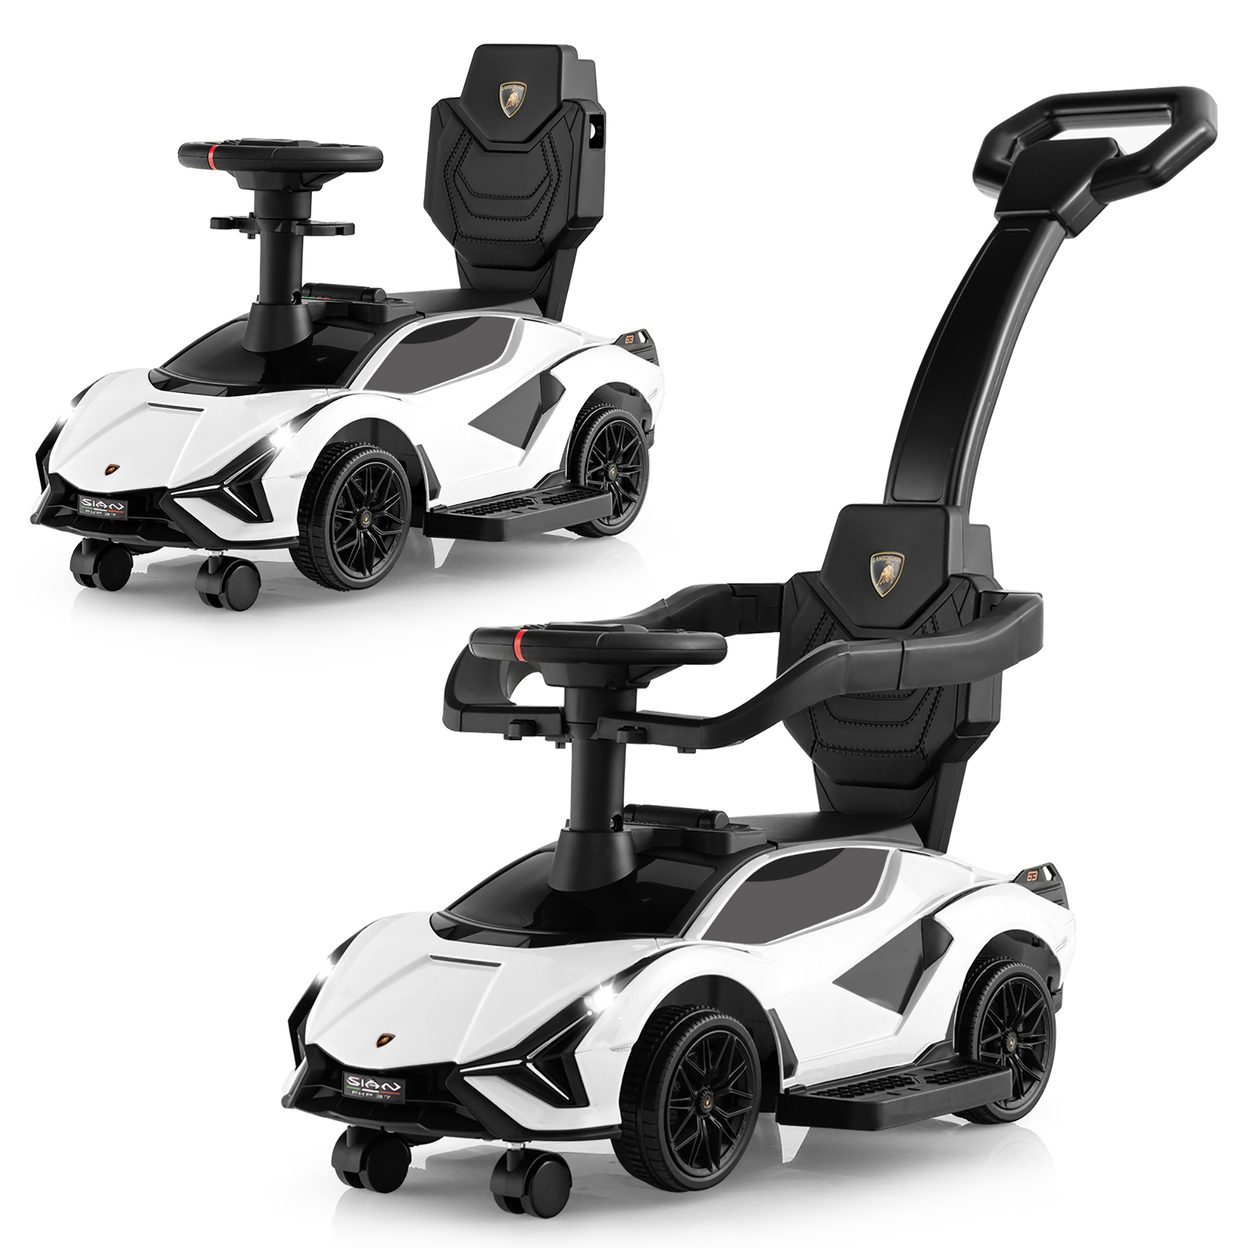 3-in-1 Licensed Lamborghini Ride On Push Car Walking Toy Stroller With USB Port - White